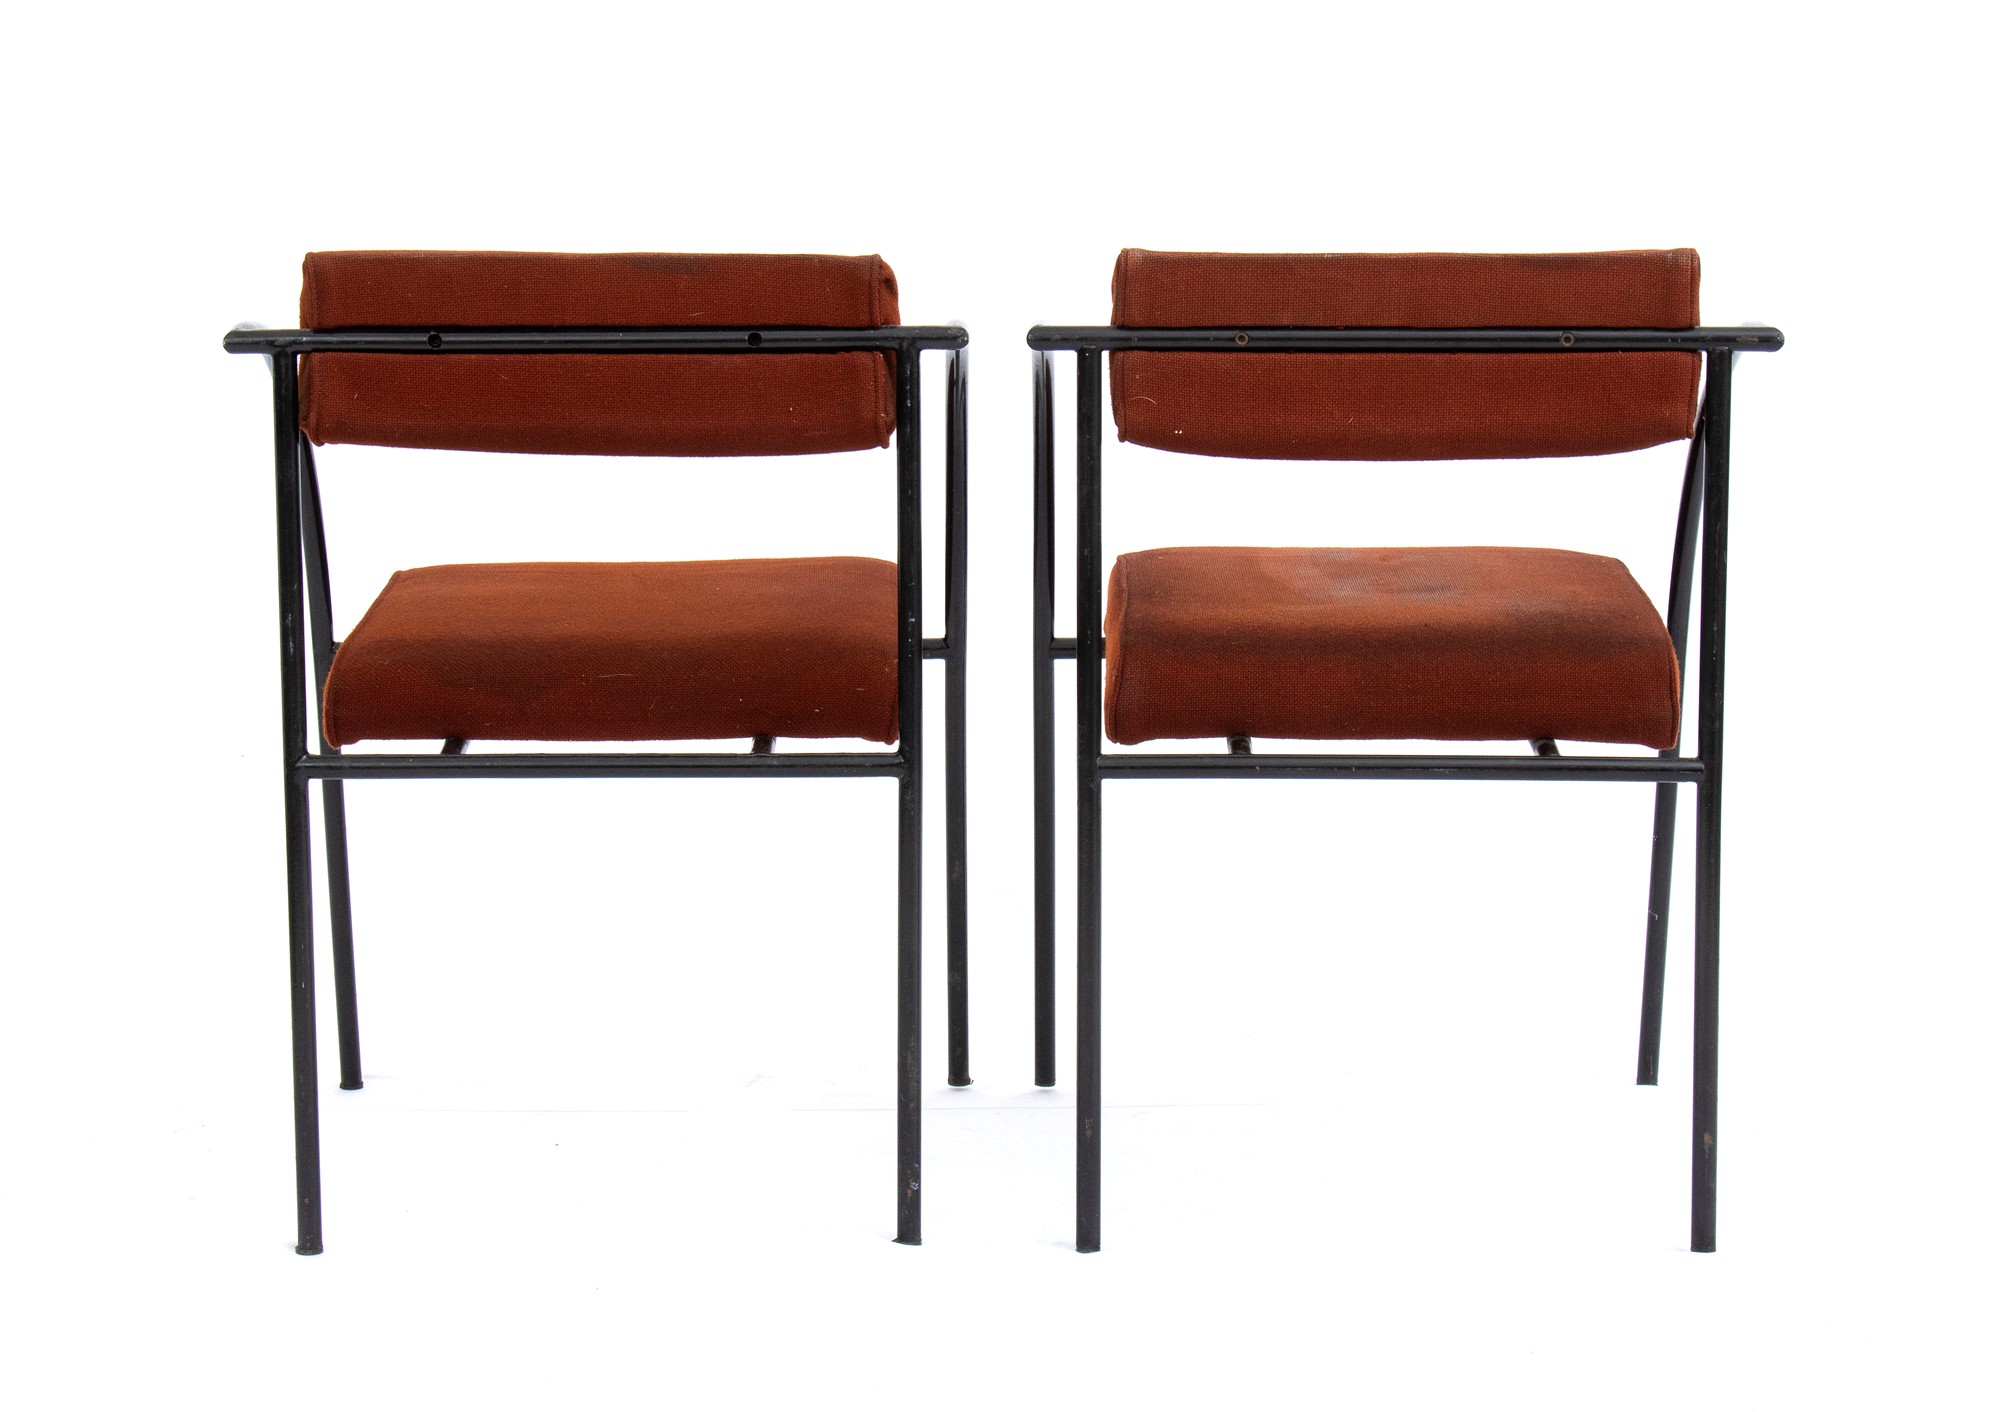 Rodney Kinsman Londra 1943 Set of two Wien chairs with round metal structure and curved armrests - Image 14 of 15